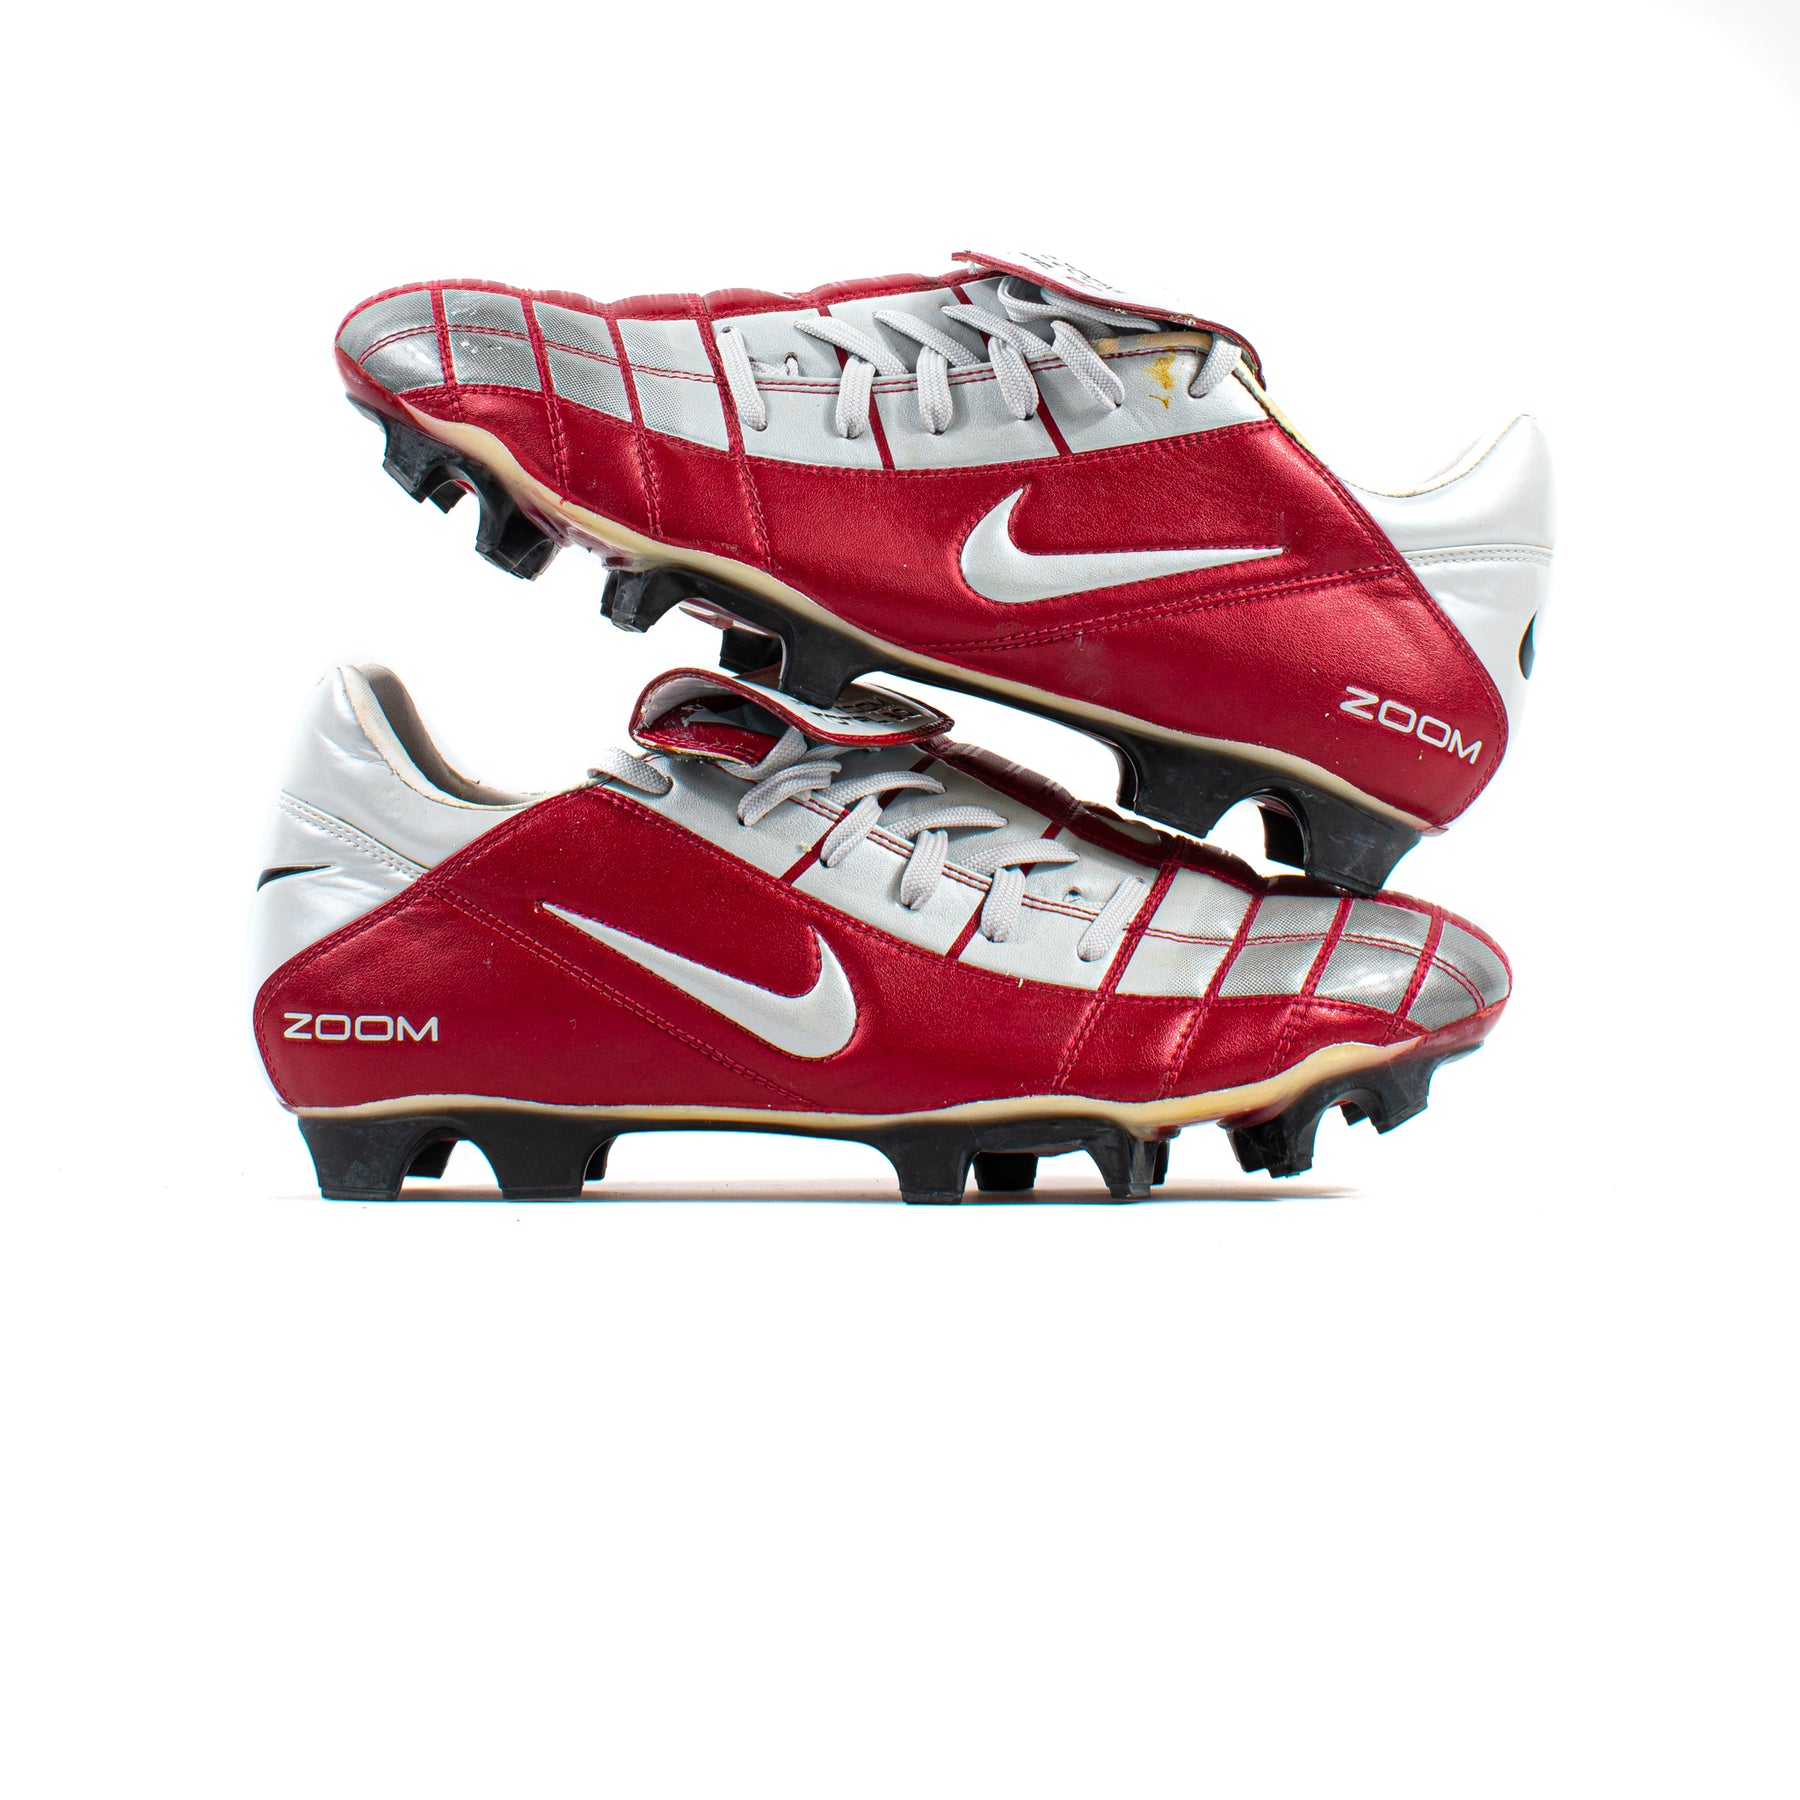 Nike Air Zoom Total 90 II Red FG – Classic Soccer Cleats